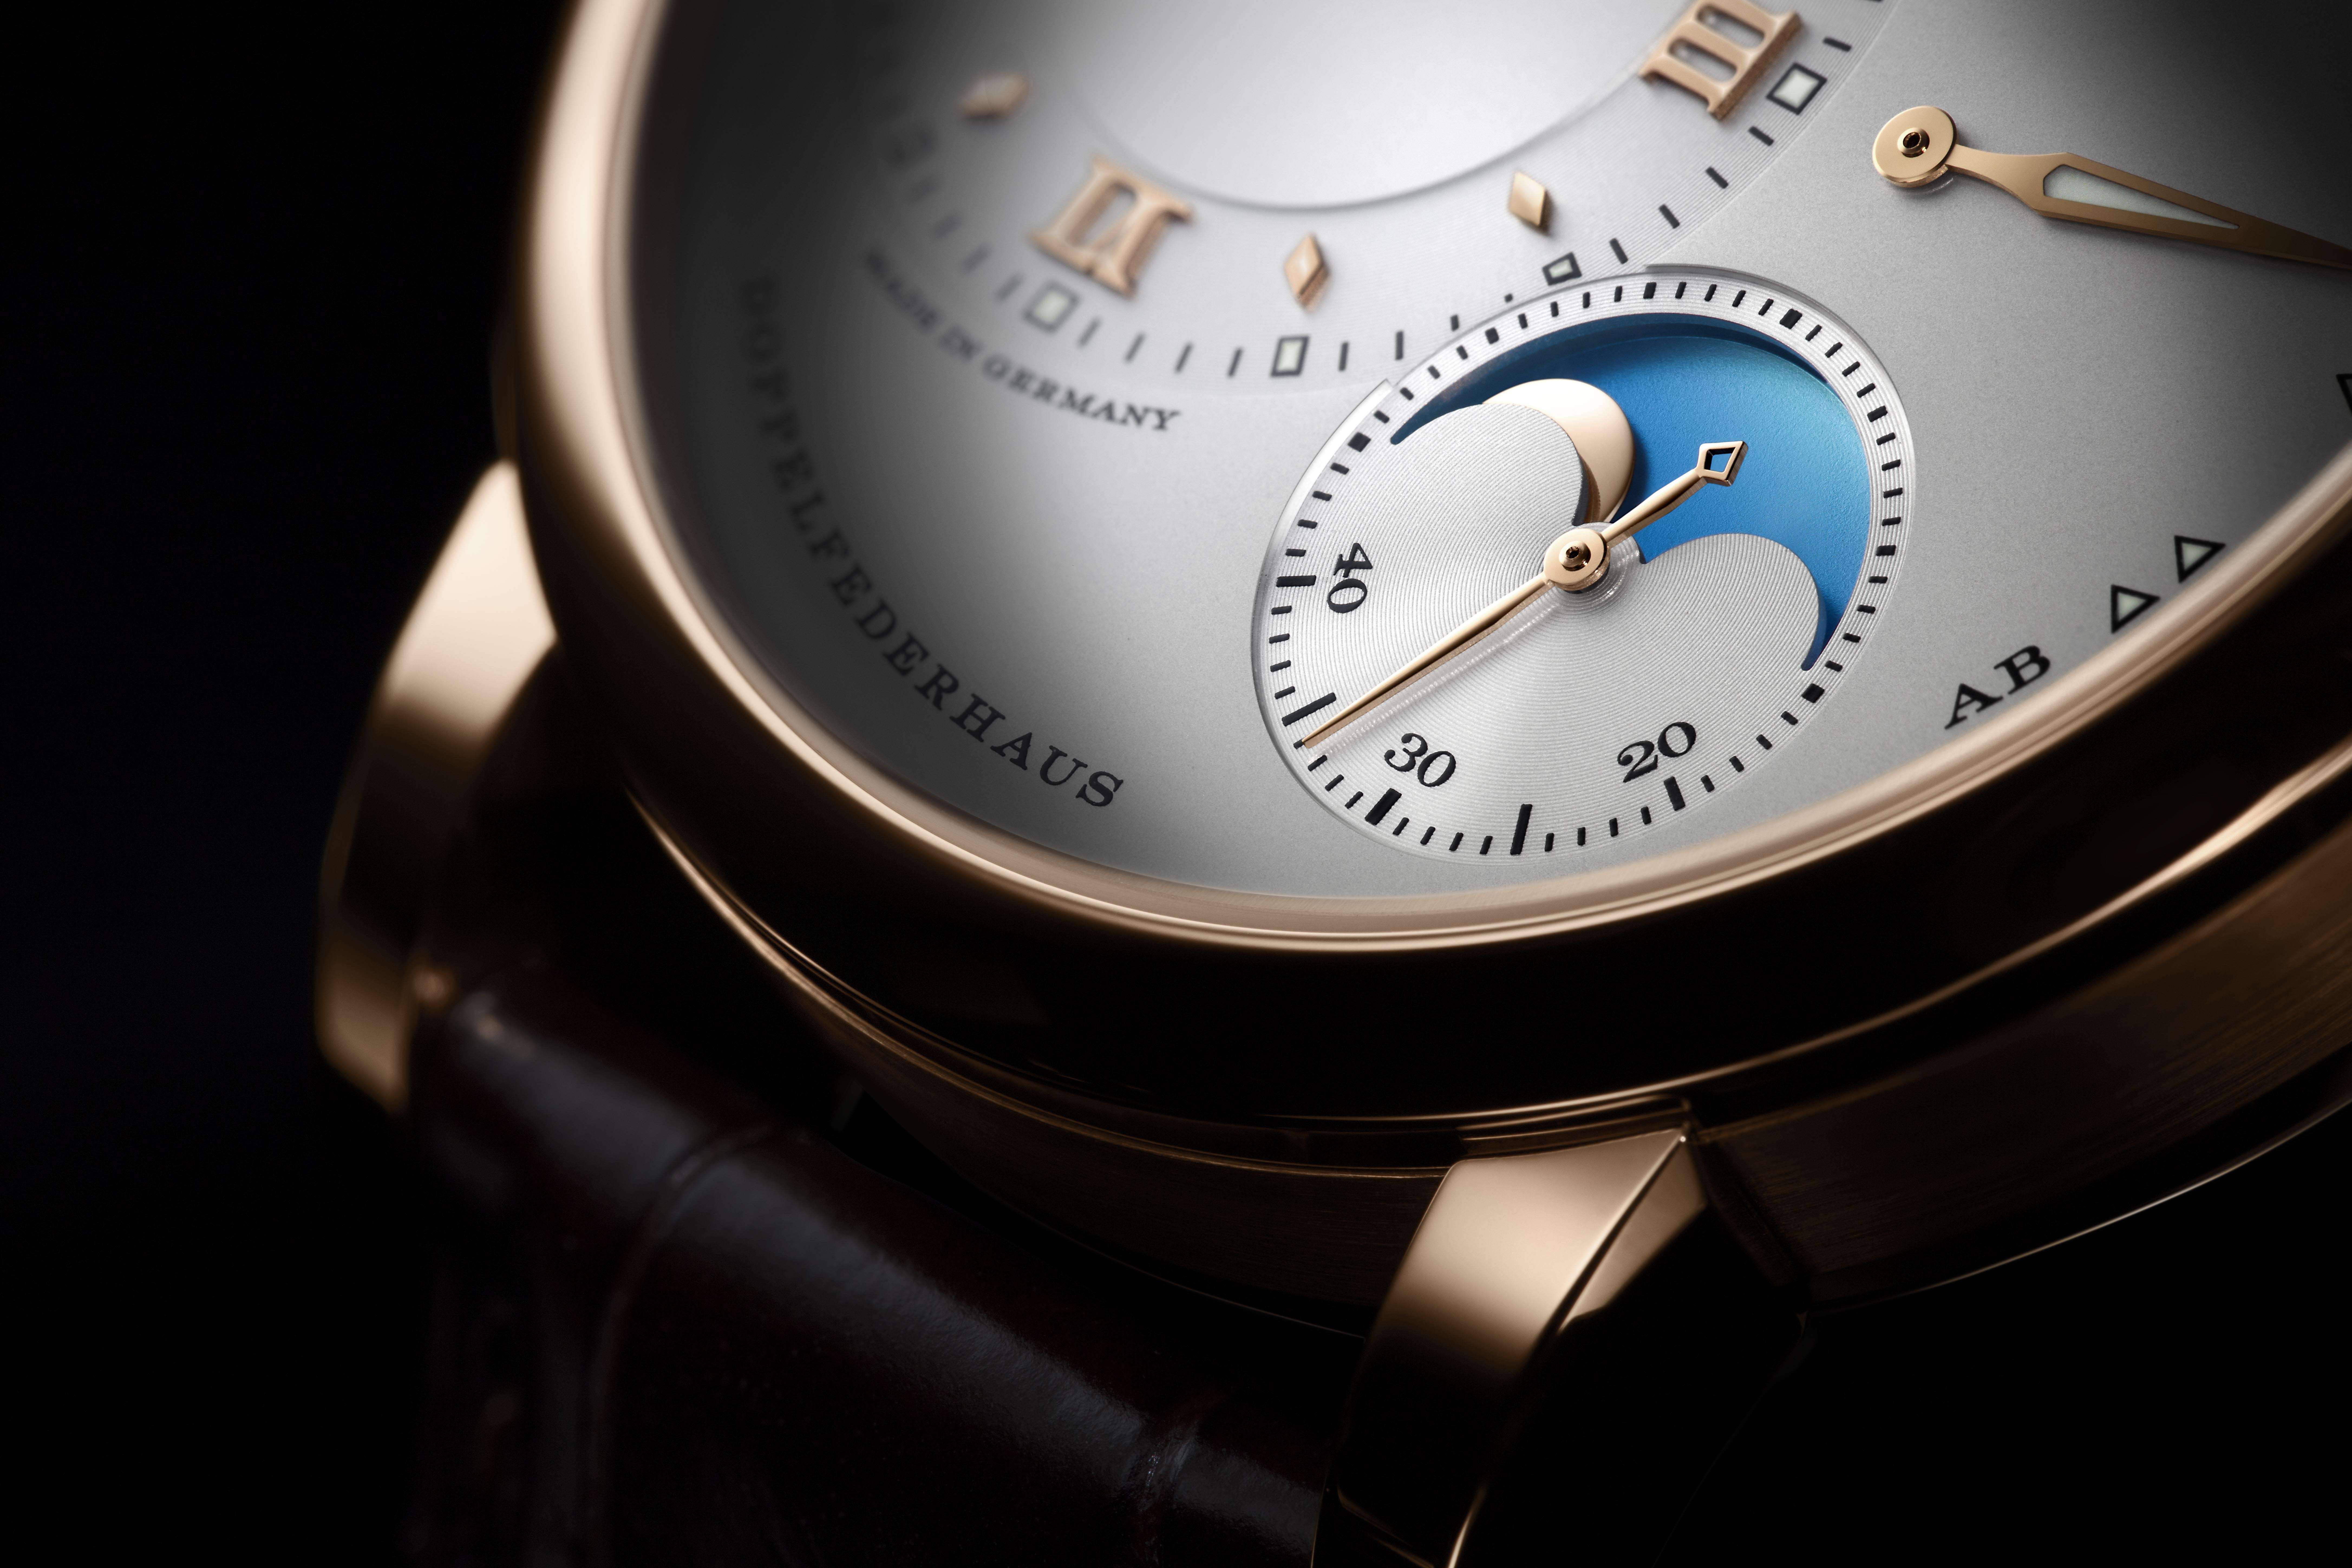 The moonphase display is supported by 70 parts.